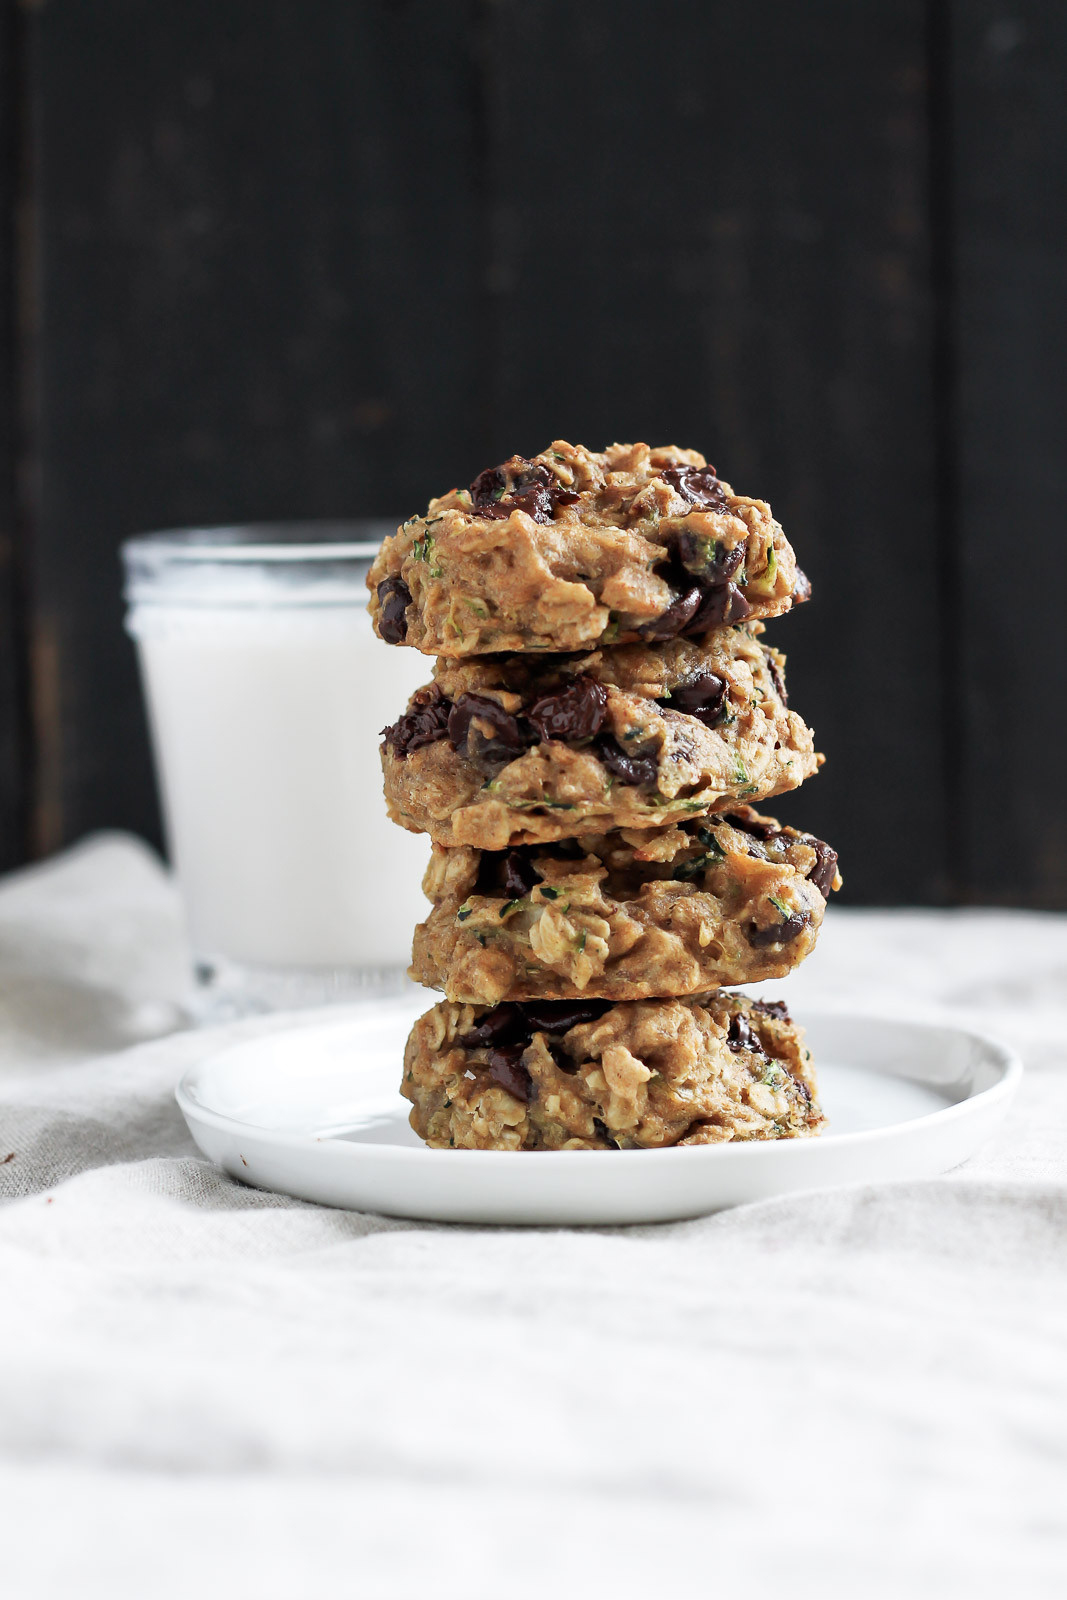 Oatmeal Chocolate Chip Cookies Healthy
 Healthy Chocolate Chip Zucchini Oatmeal Cookies